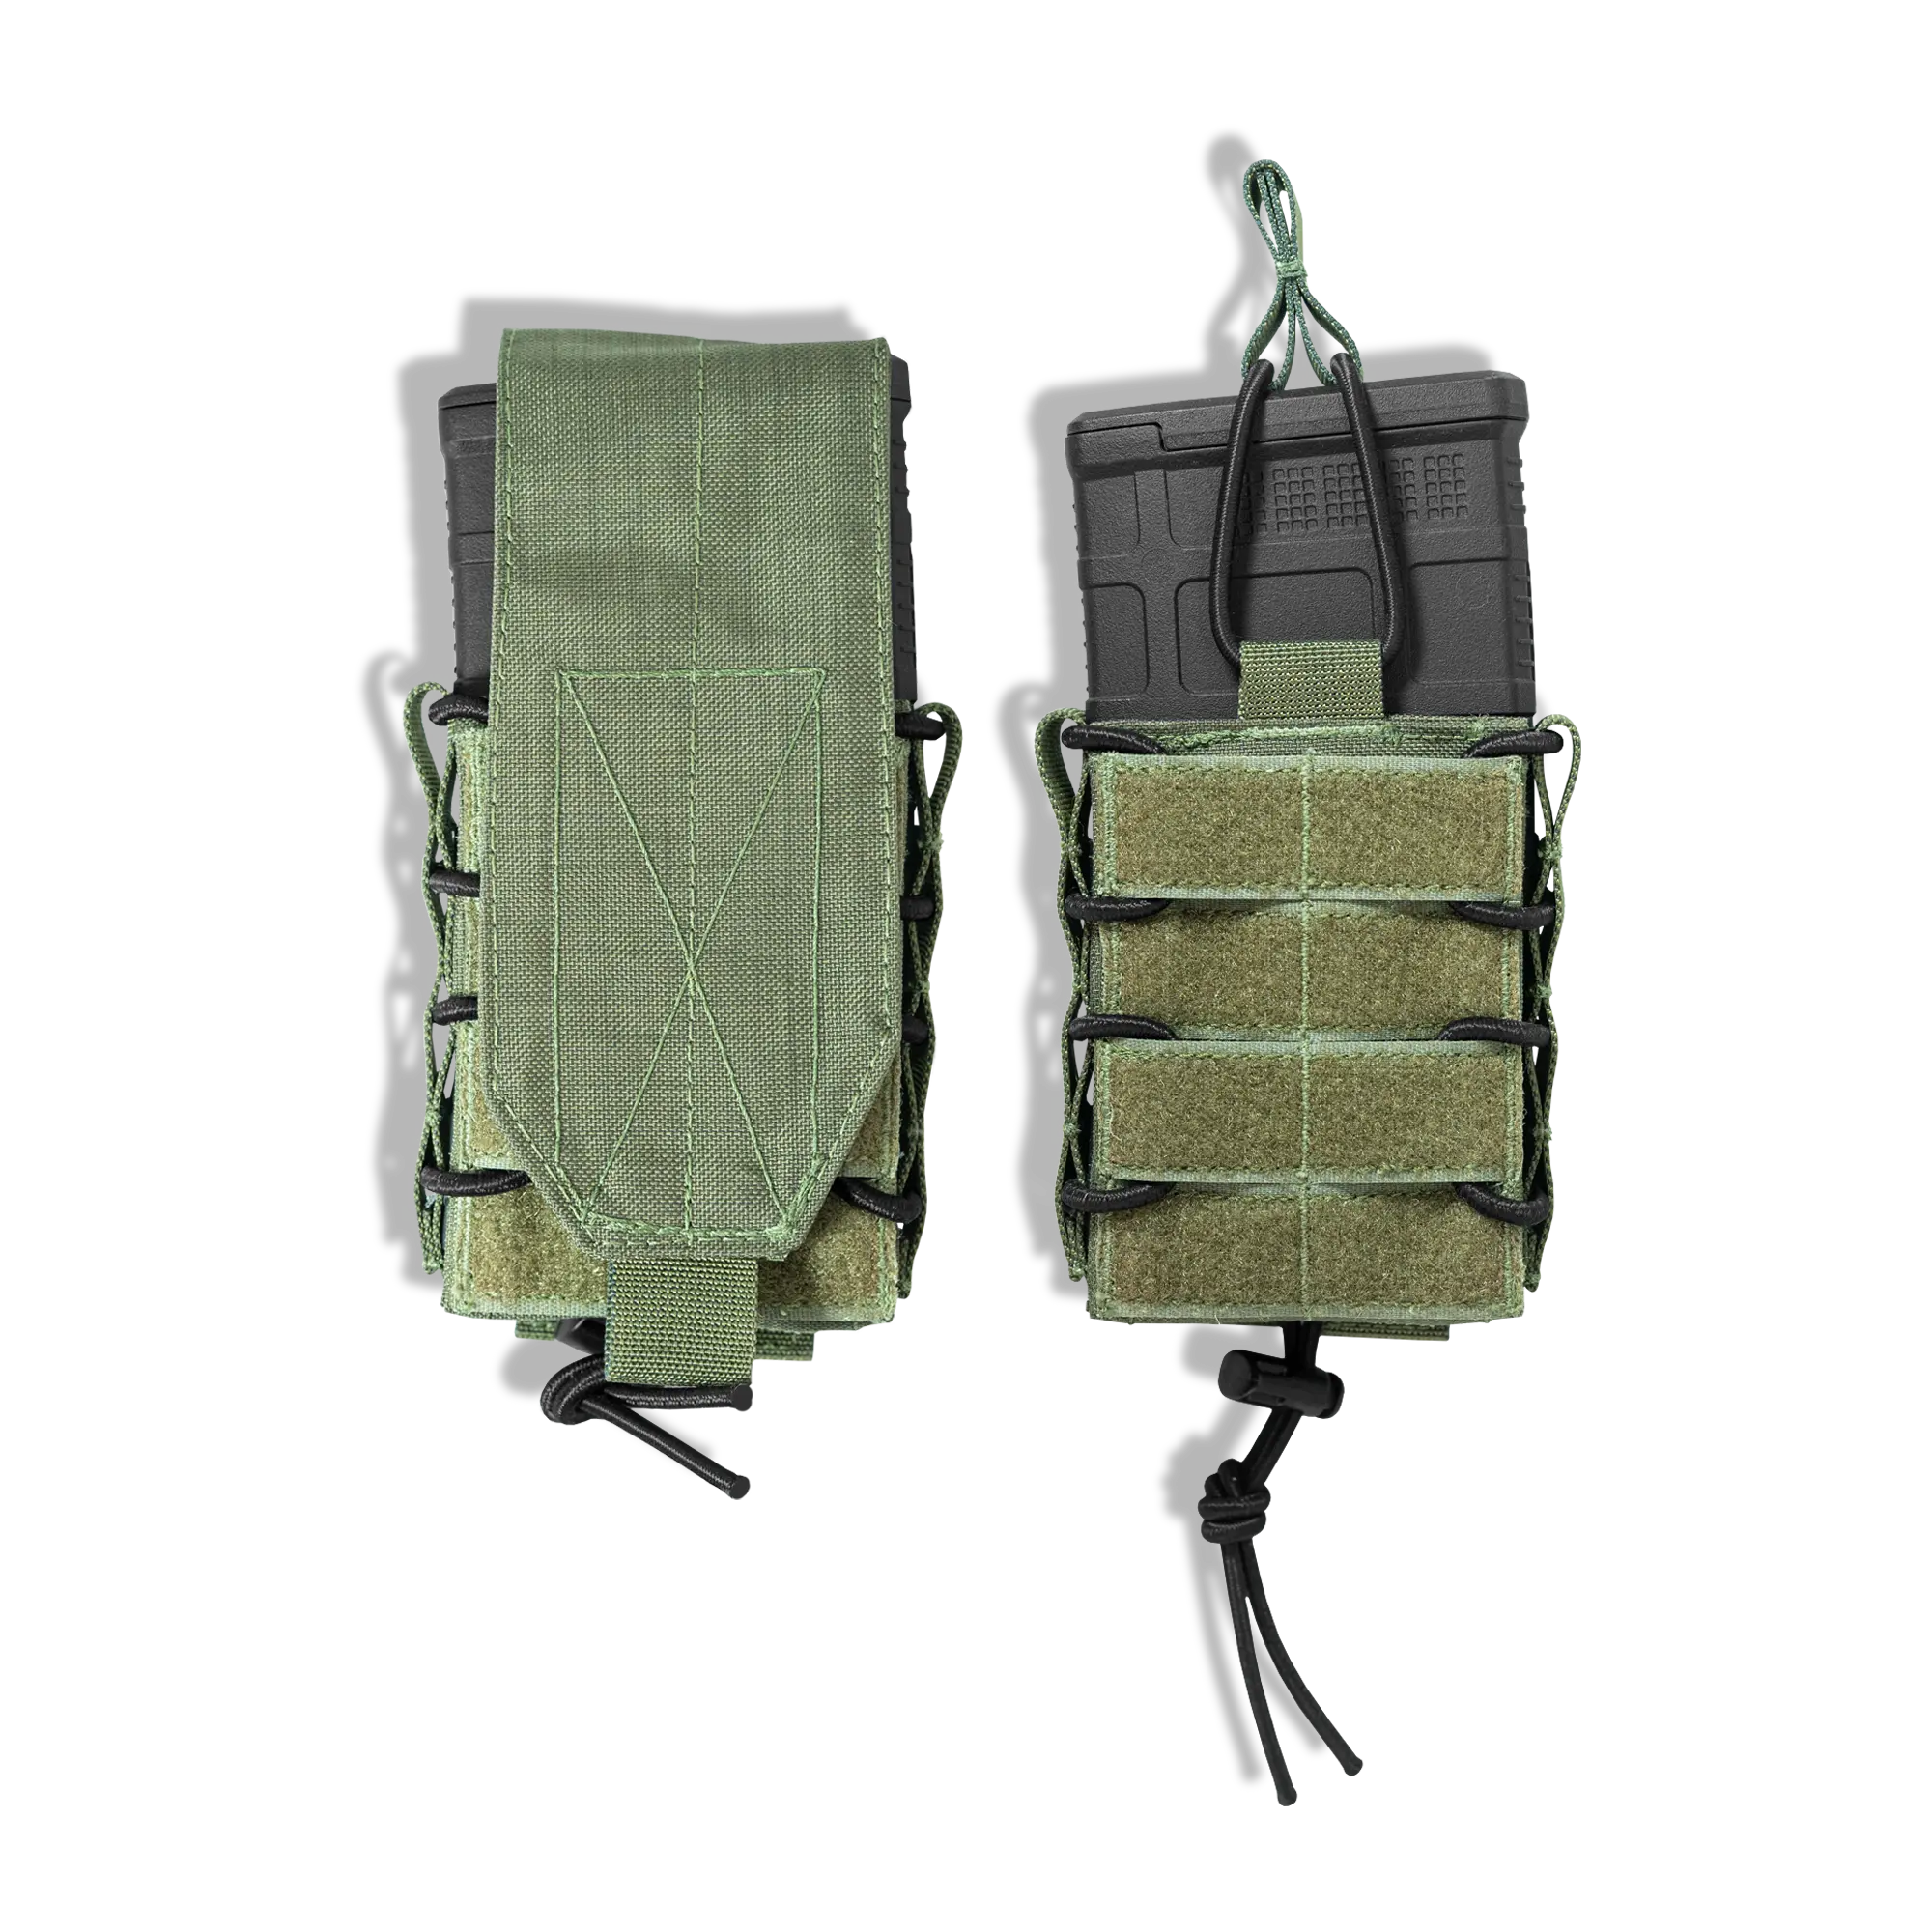 Rifle Mag Pouch 4 in_open and flap